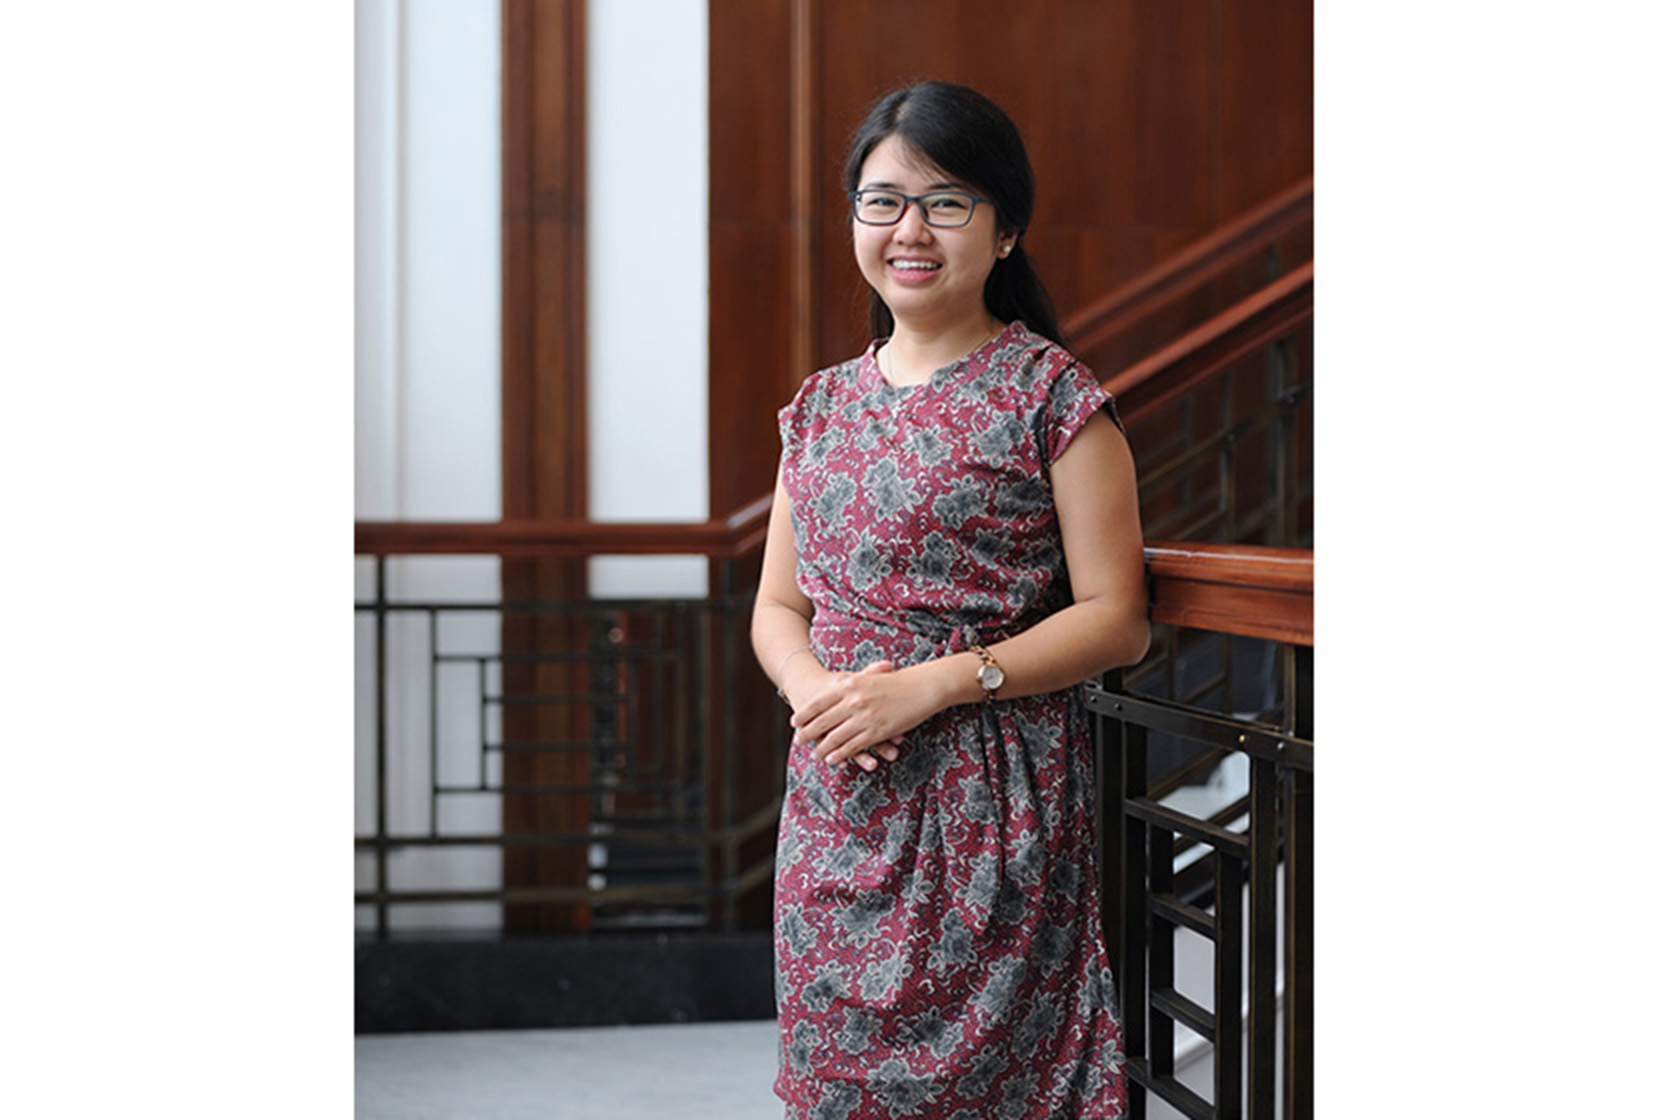 A woman with glasses and batik dress is standing in front of staircase